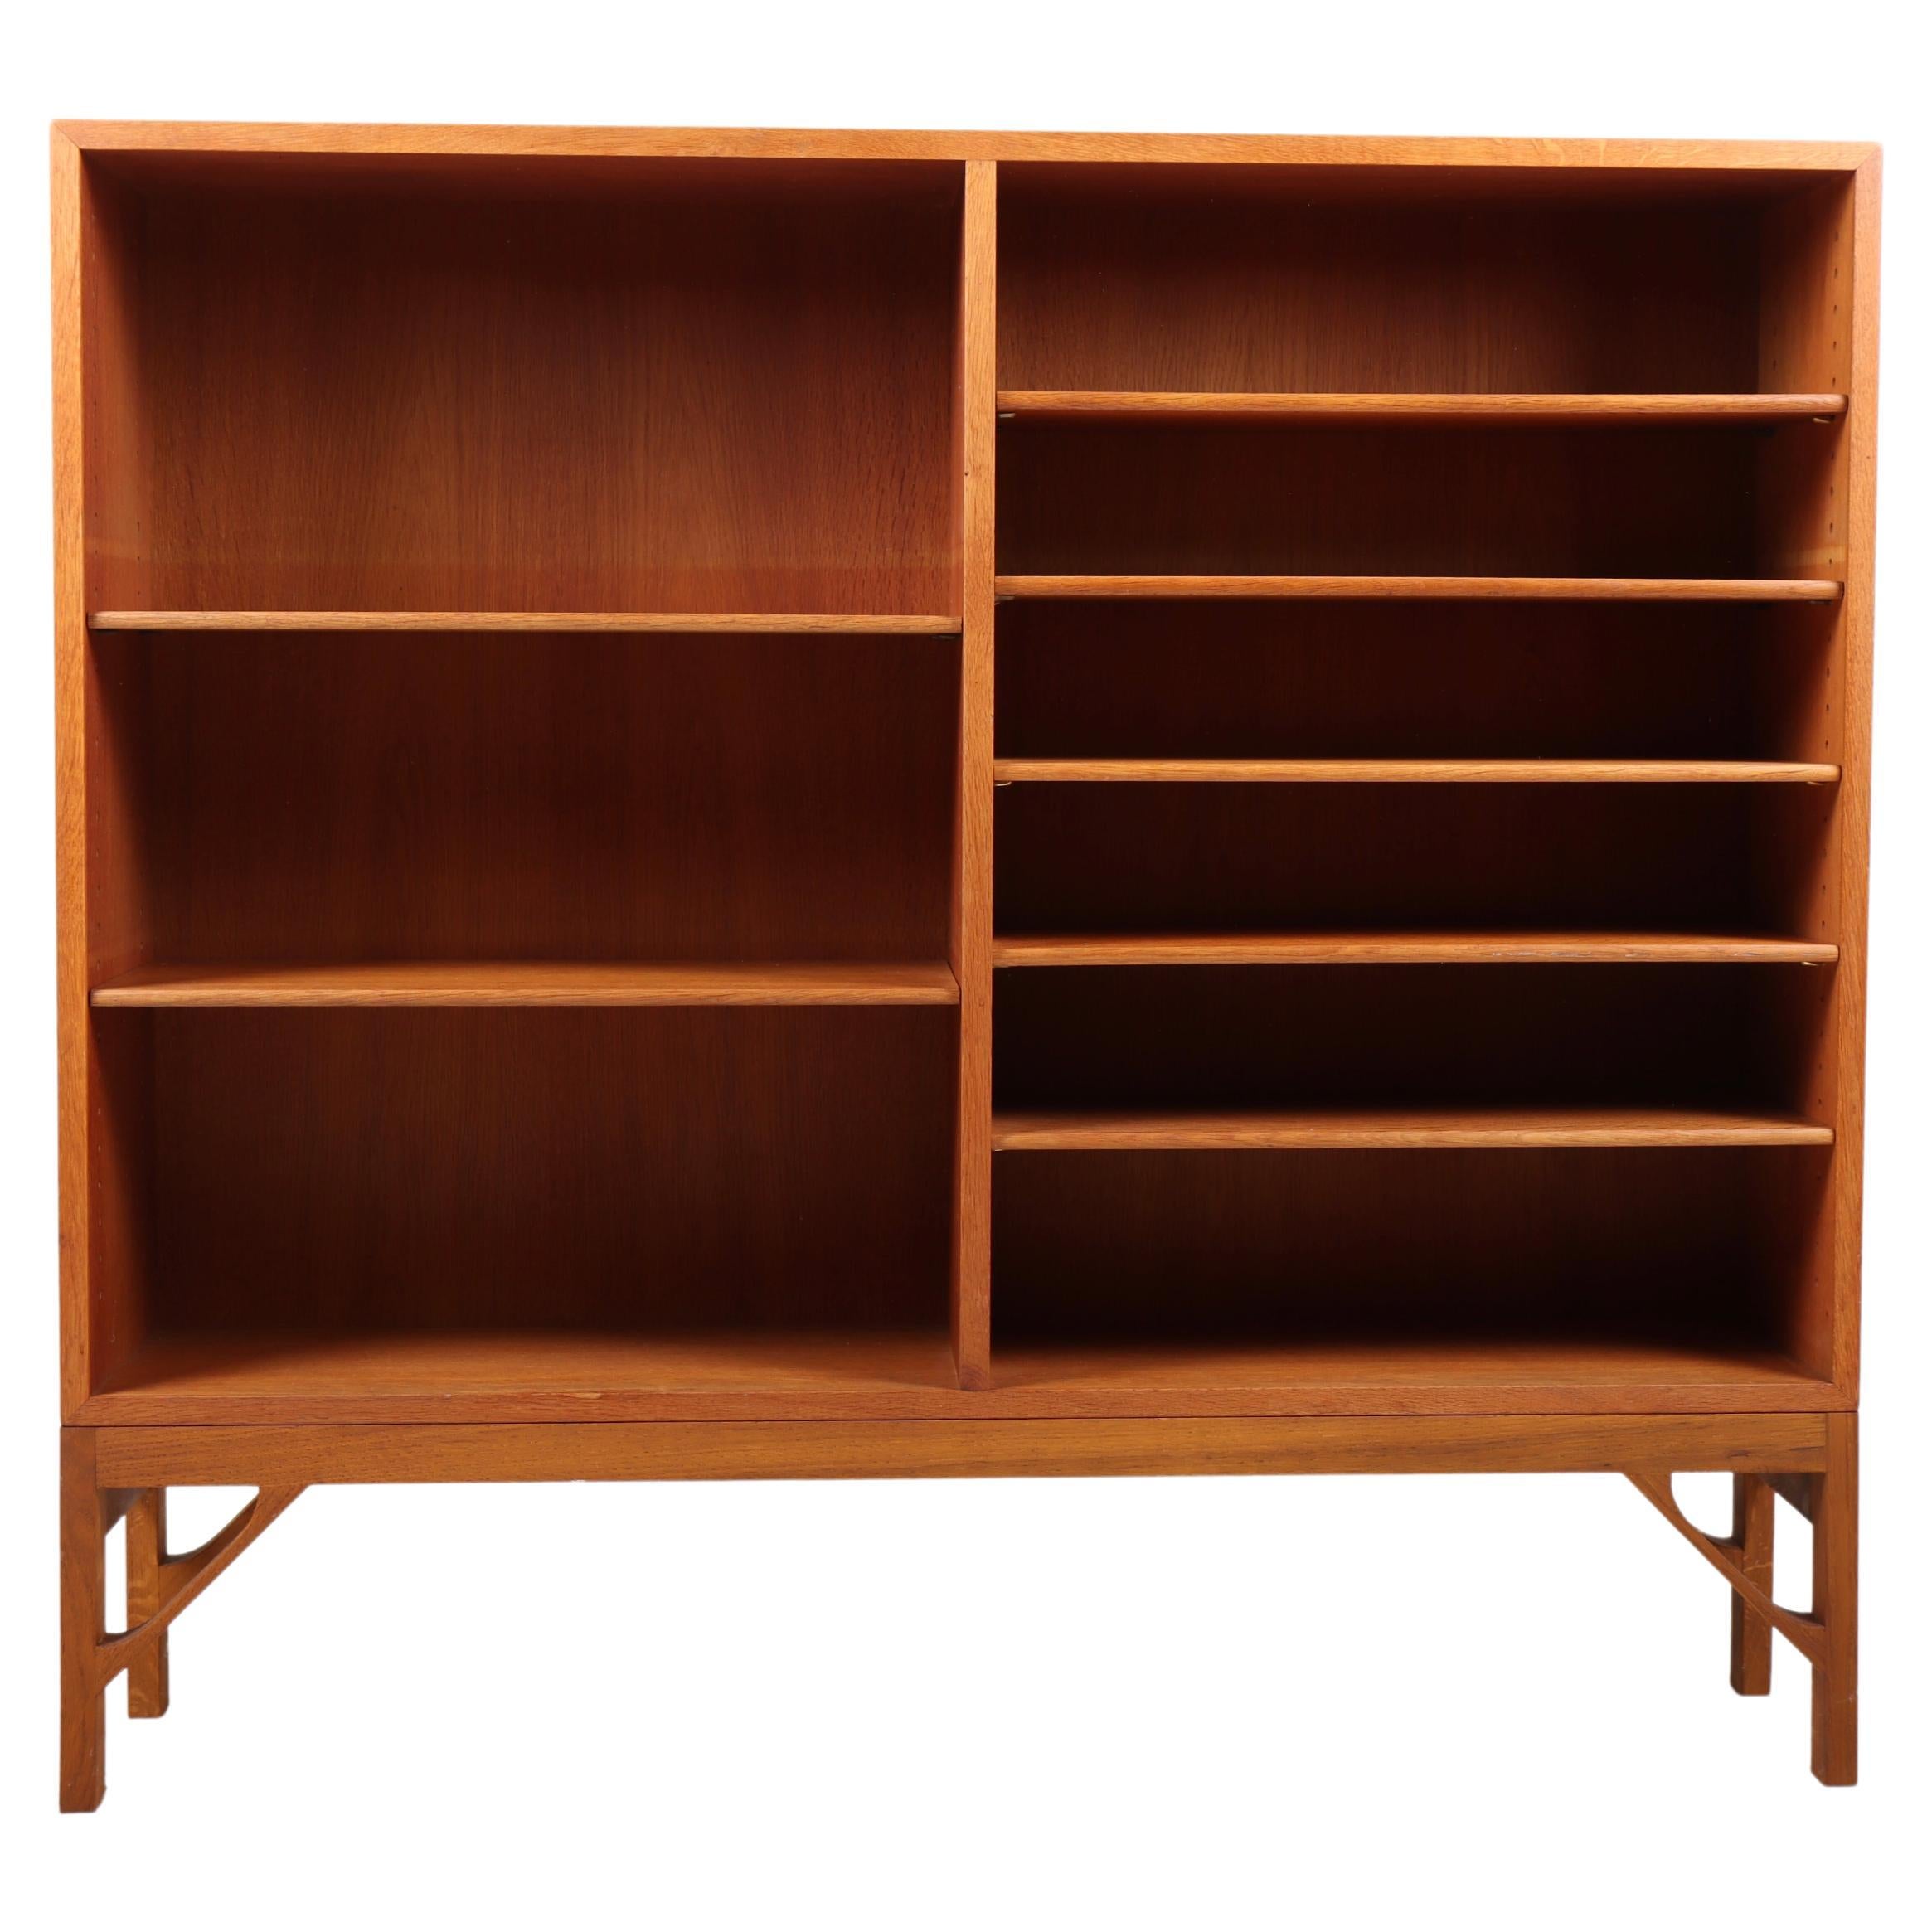 Midcentury "China" Bookcase in Oak by Børge Mogensen, Made in Denmark For Sale